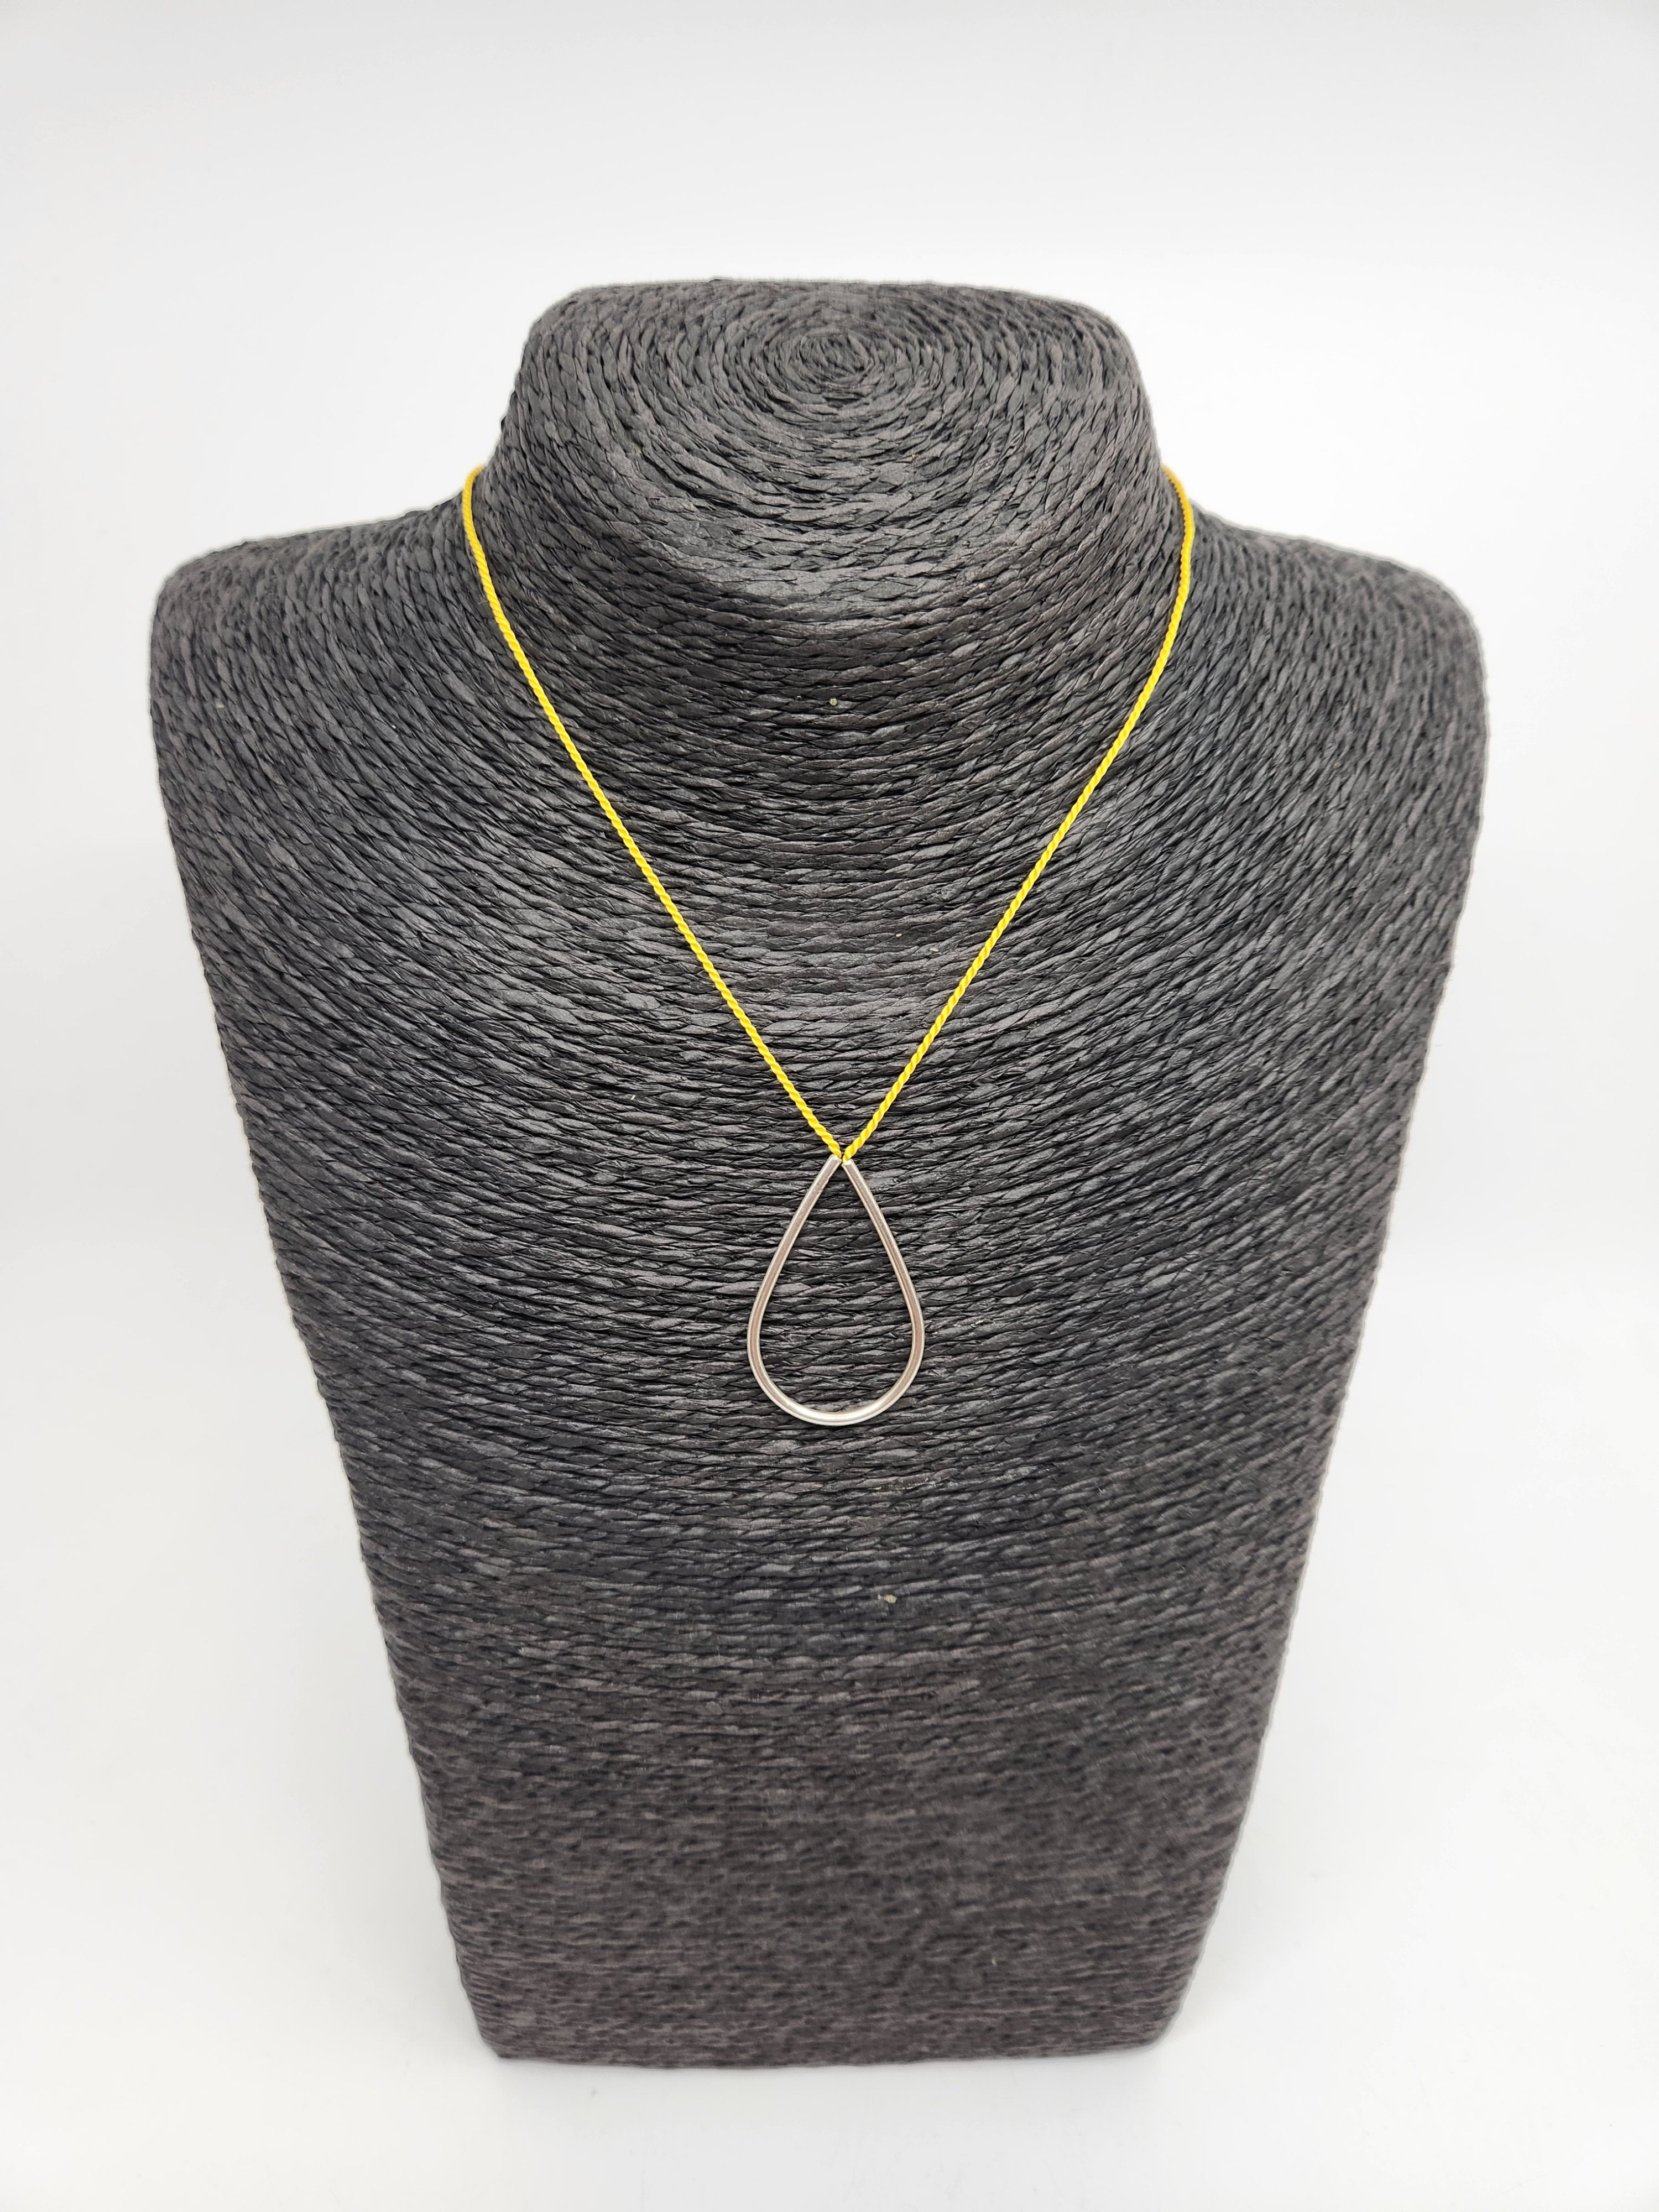 Small Dew Drop Necklace on Silk Cord - Assorted Cord Colours